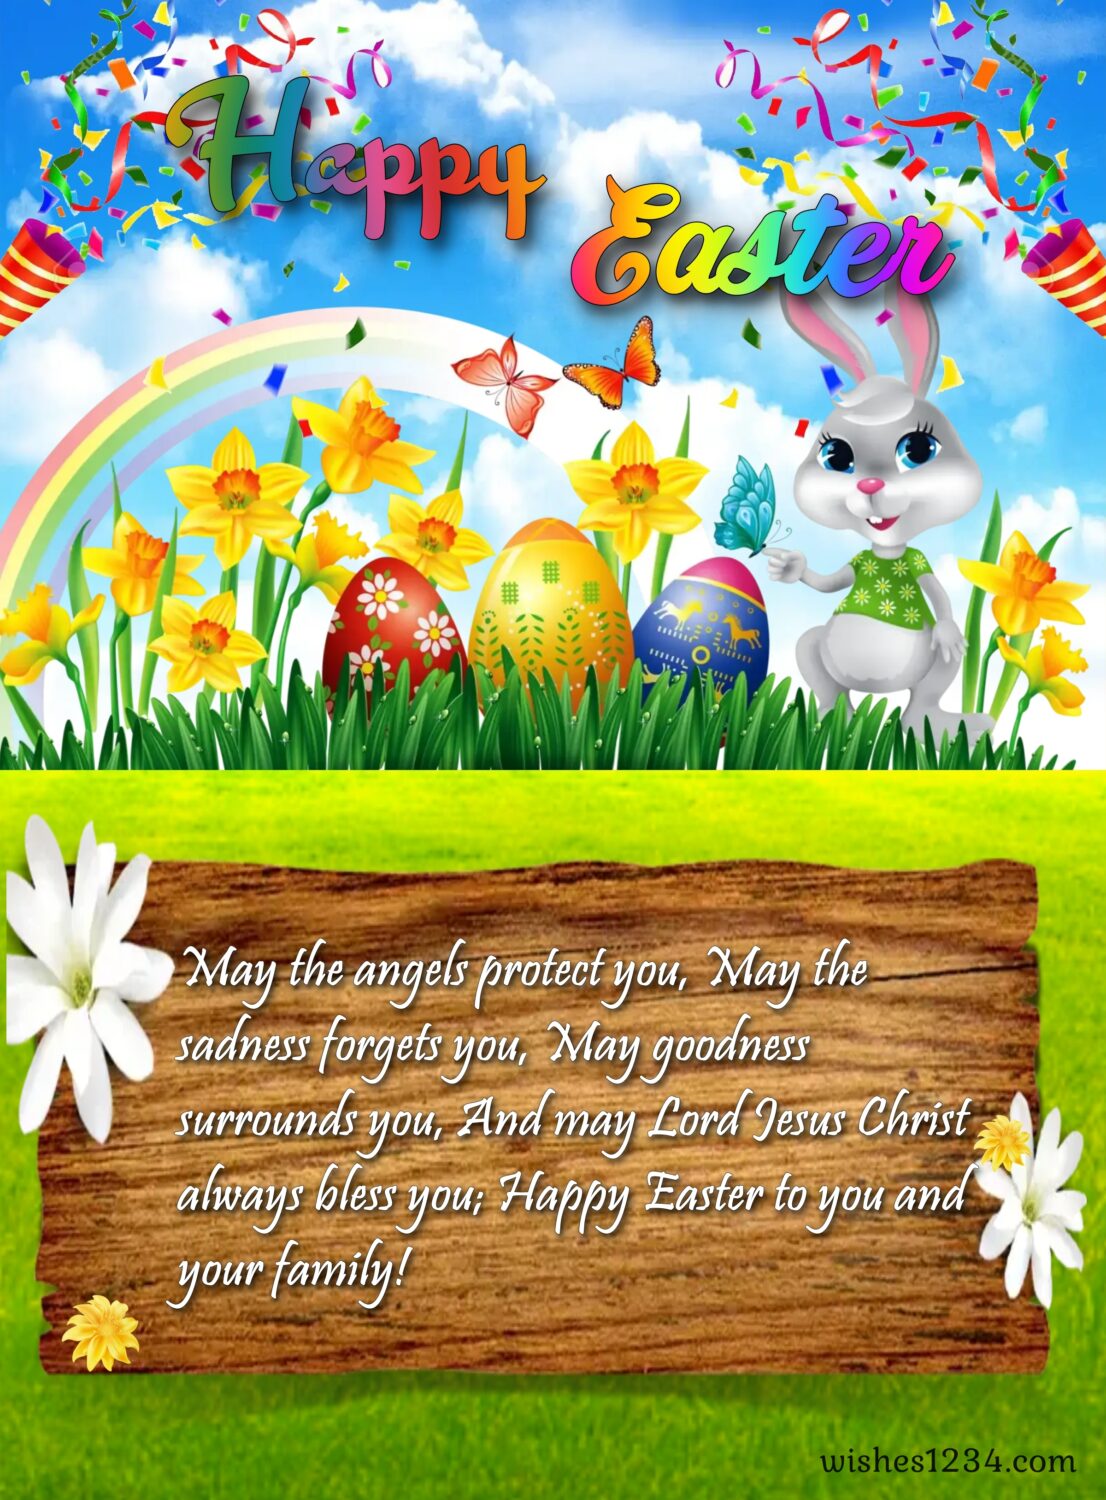 Easter bunny with three eggs, Happy Easter Wishes, Quotes & Images.